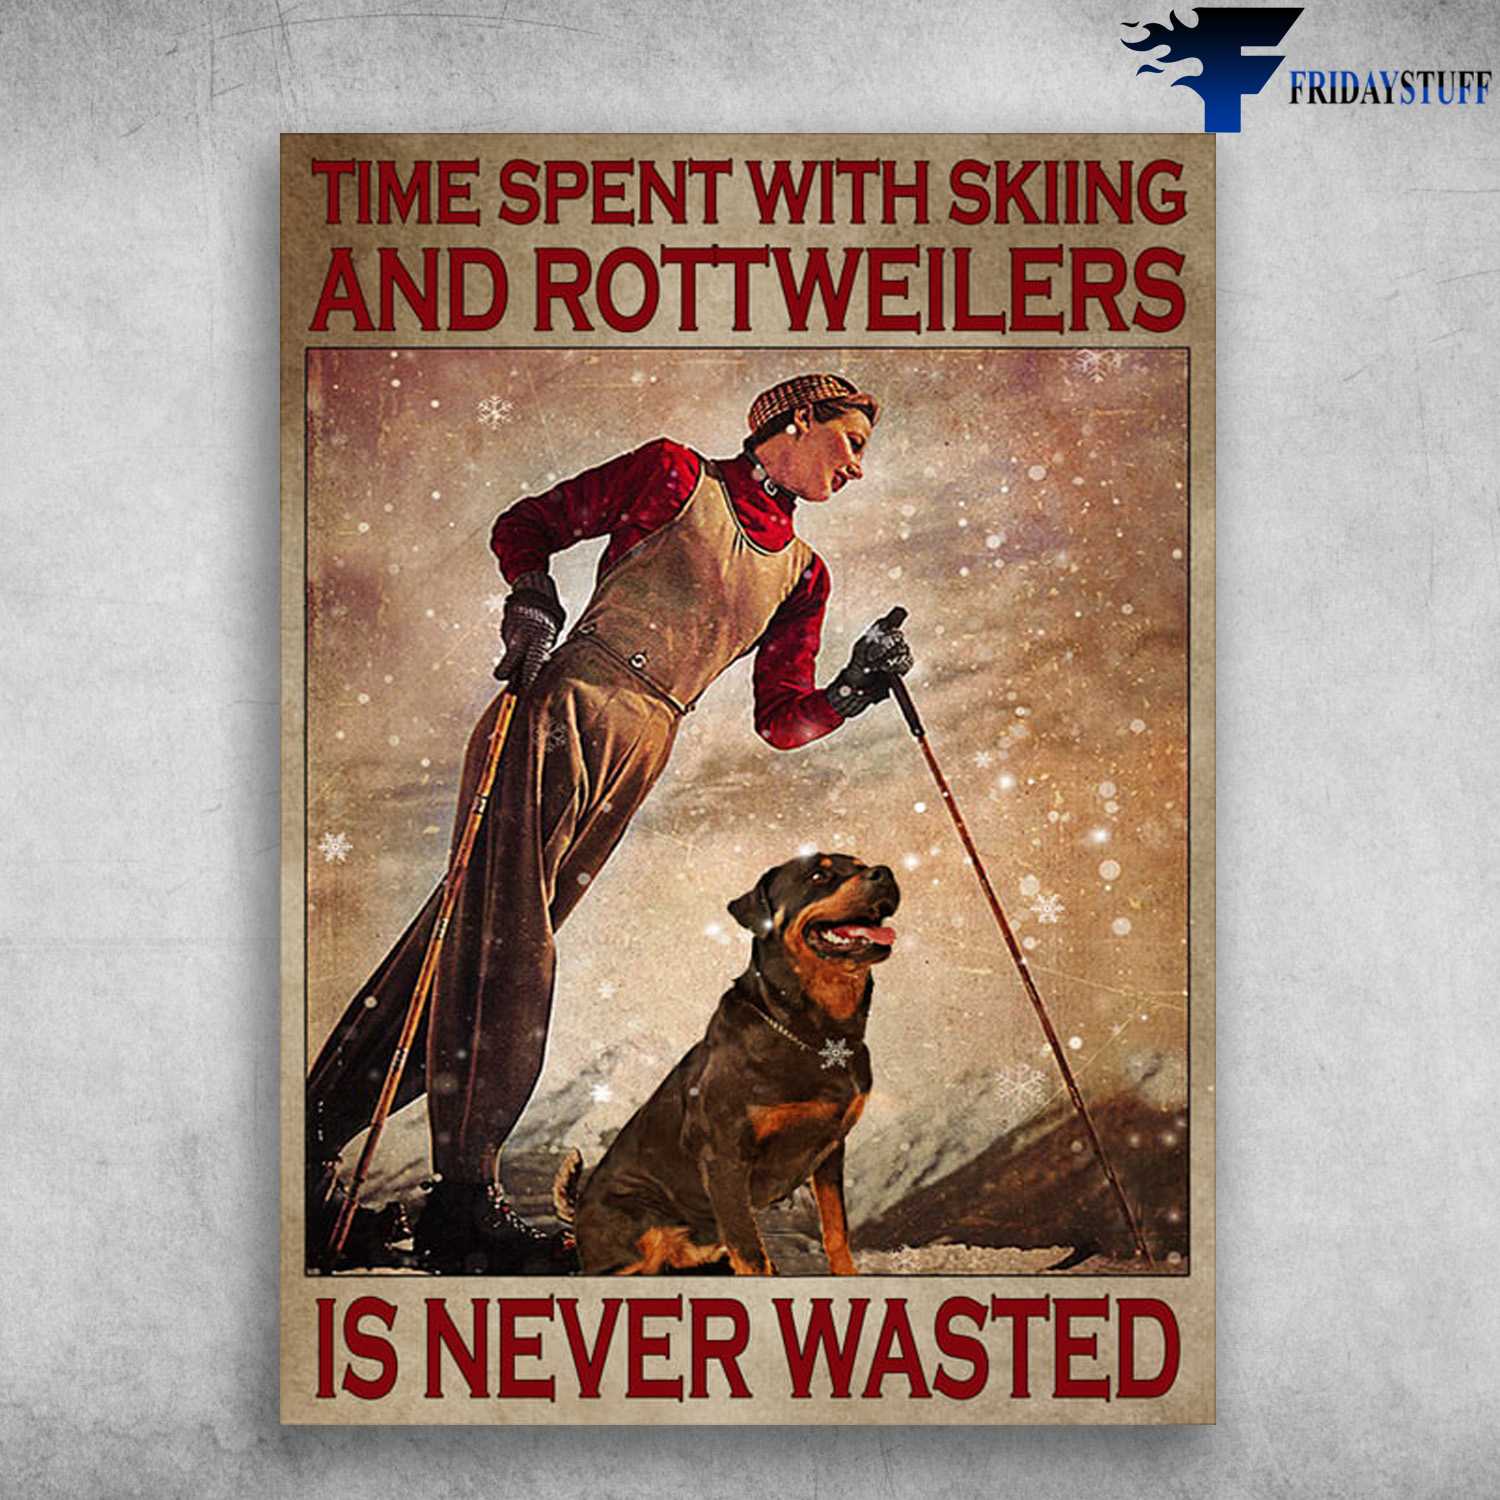 Skiing With Dog - Time Spent With, Skiing And Rottwelers, Is Never Wasted